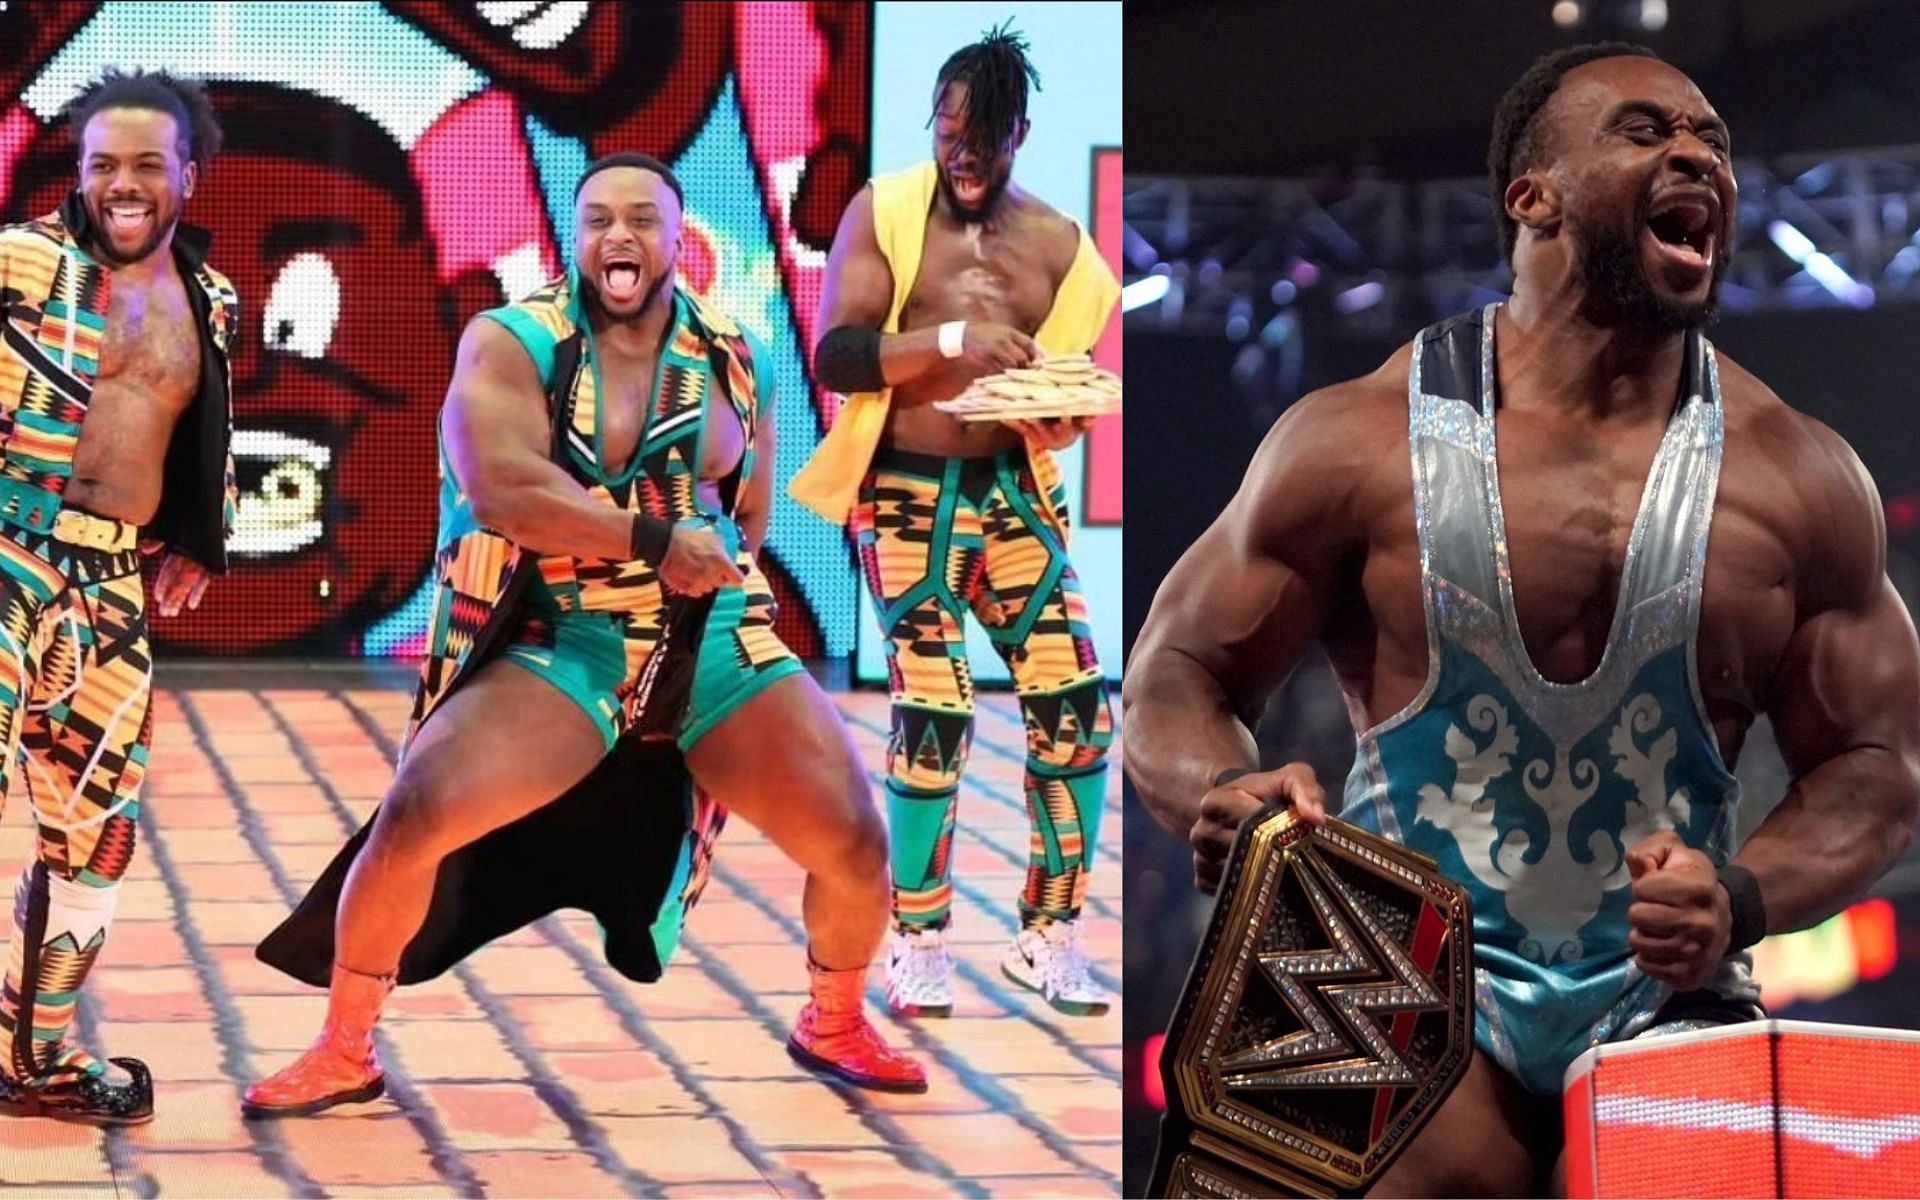 Thanks to the Power of Positivity, Big E just made the list!